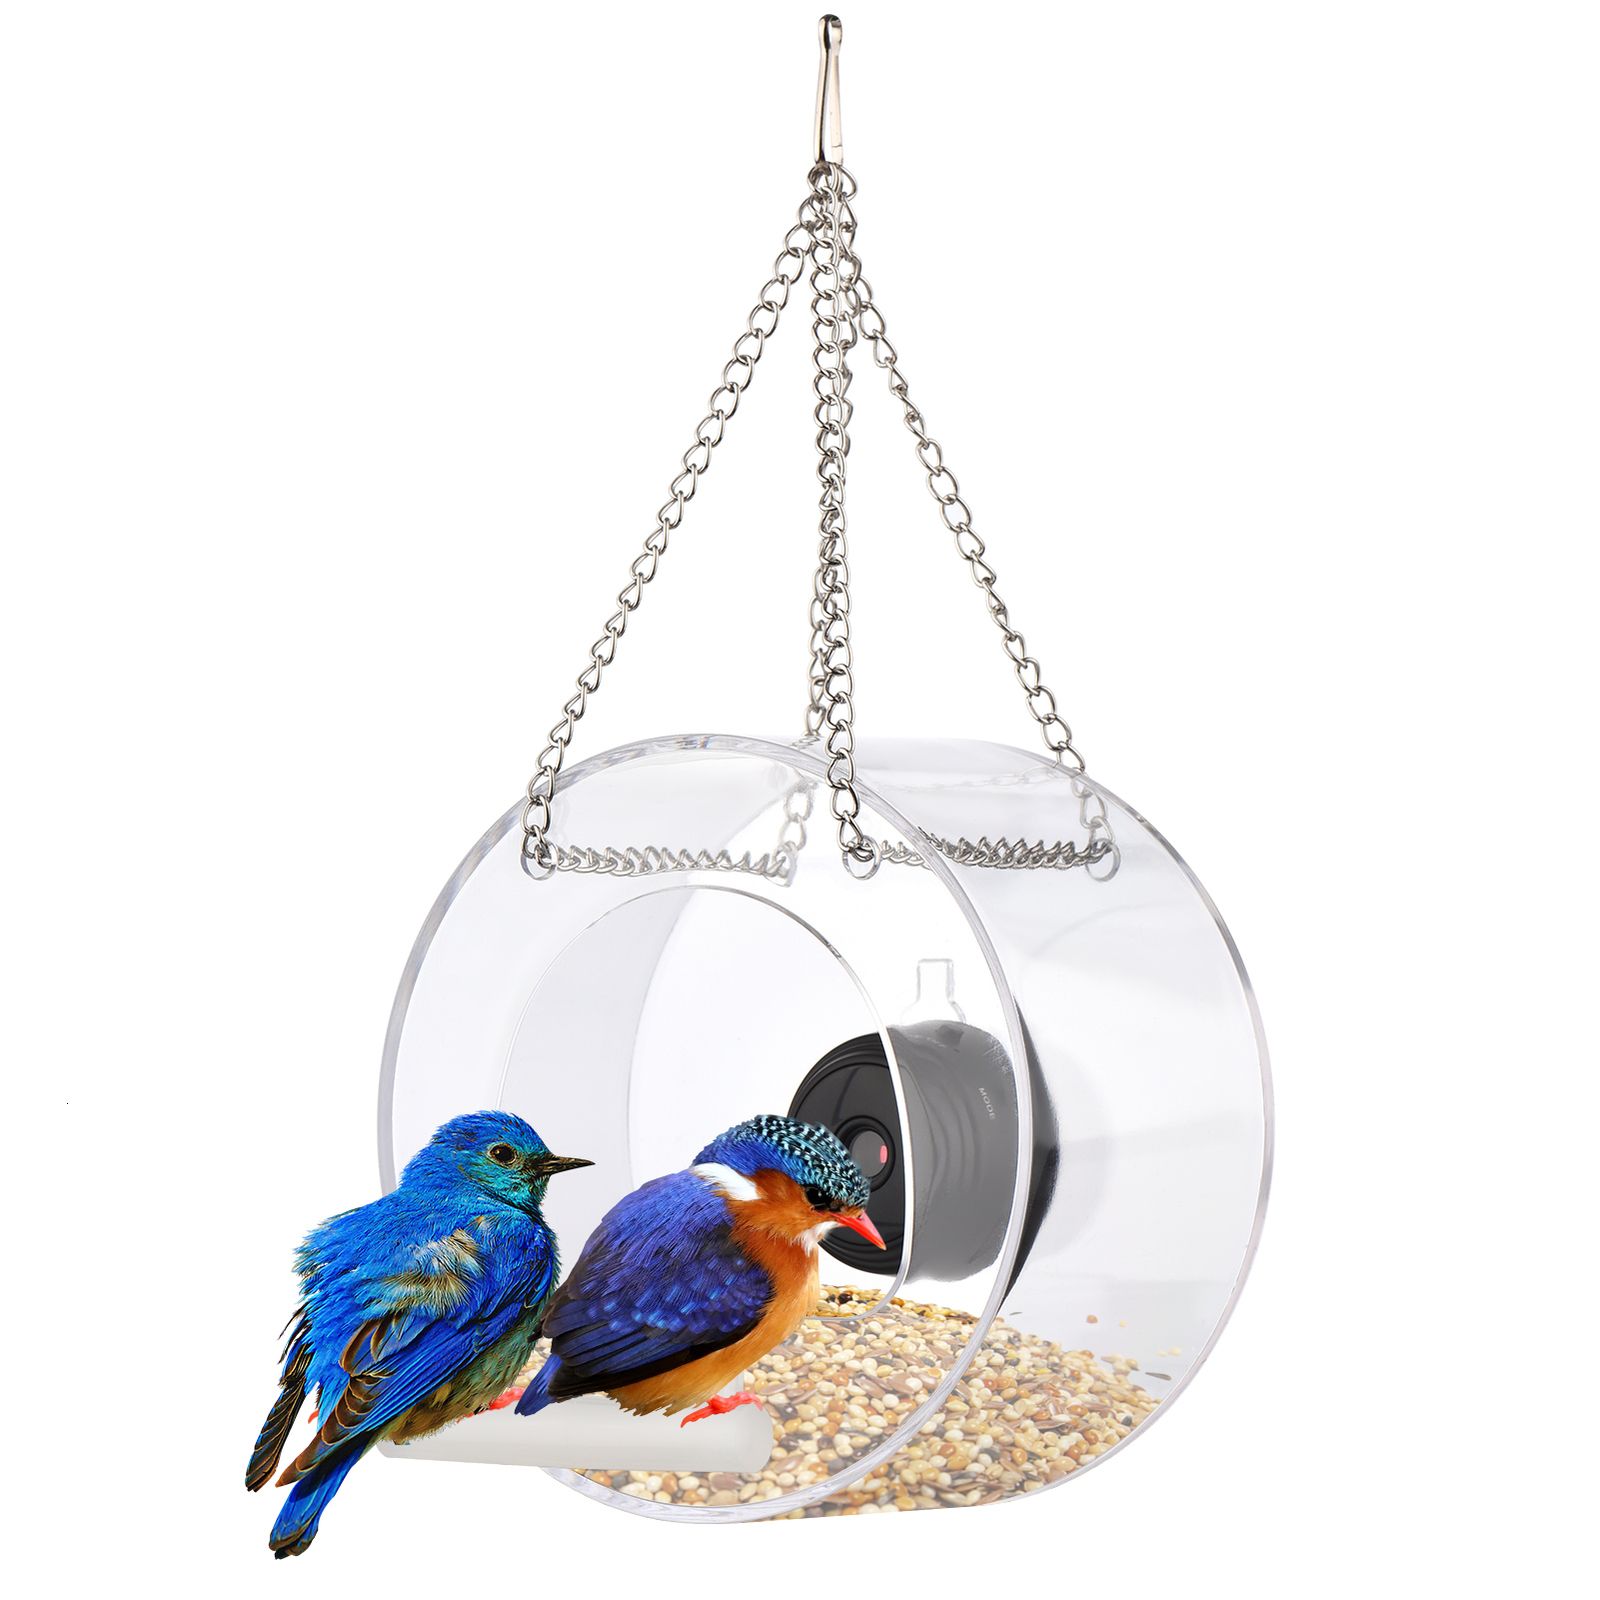 Other Pet Supplies Clear Window Bird Feeder With Wifi Camera Suction Cup  Smart Transparent Round Birdfeeder 16GB TF Card 230701 From Bong10, $10.66